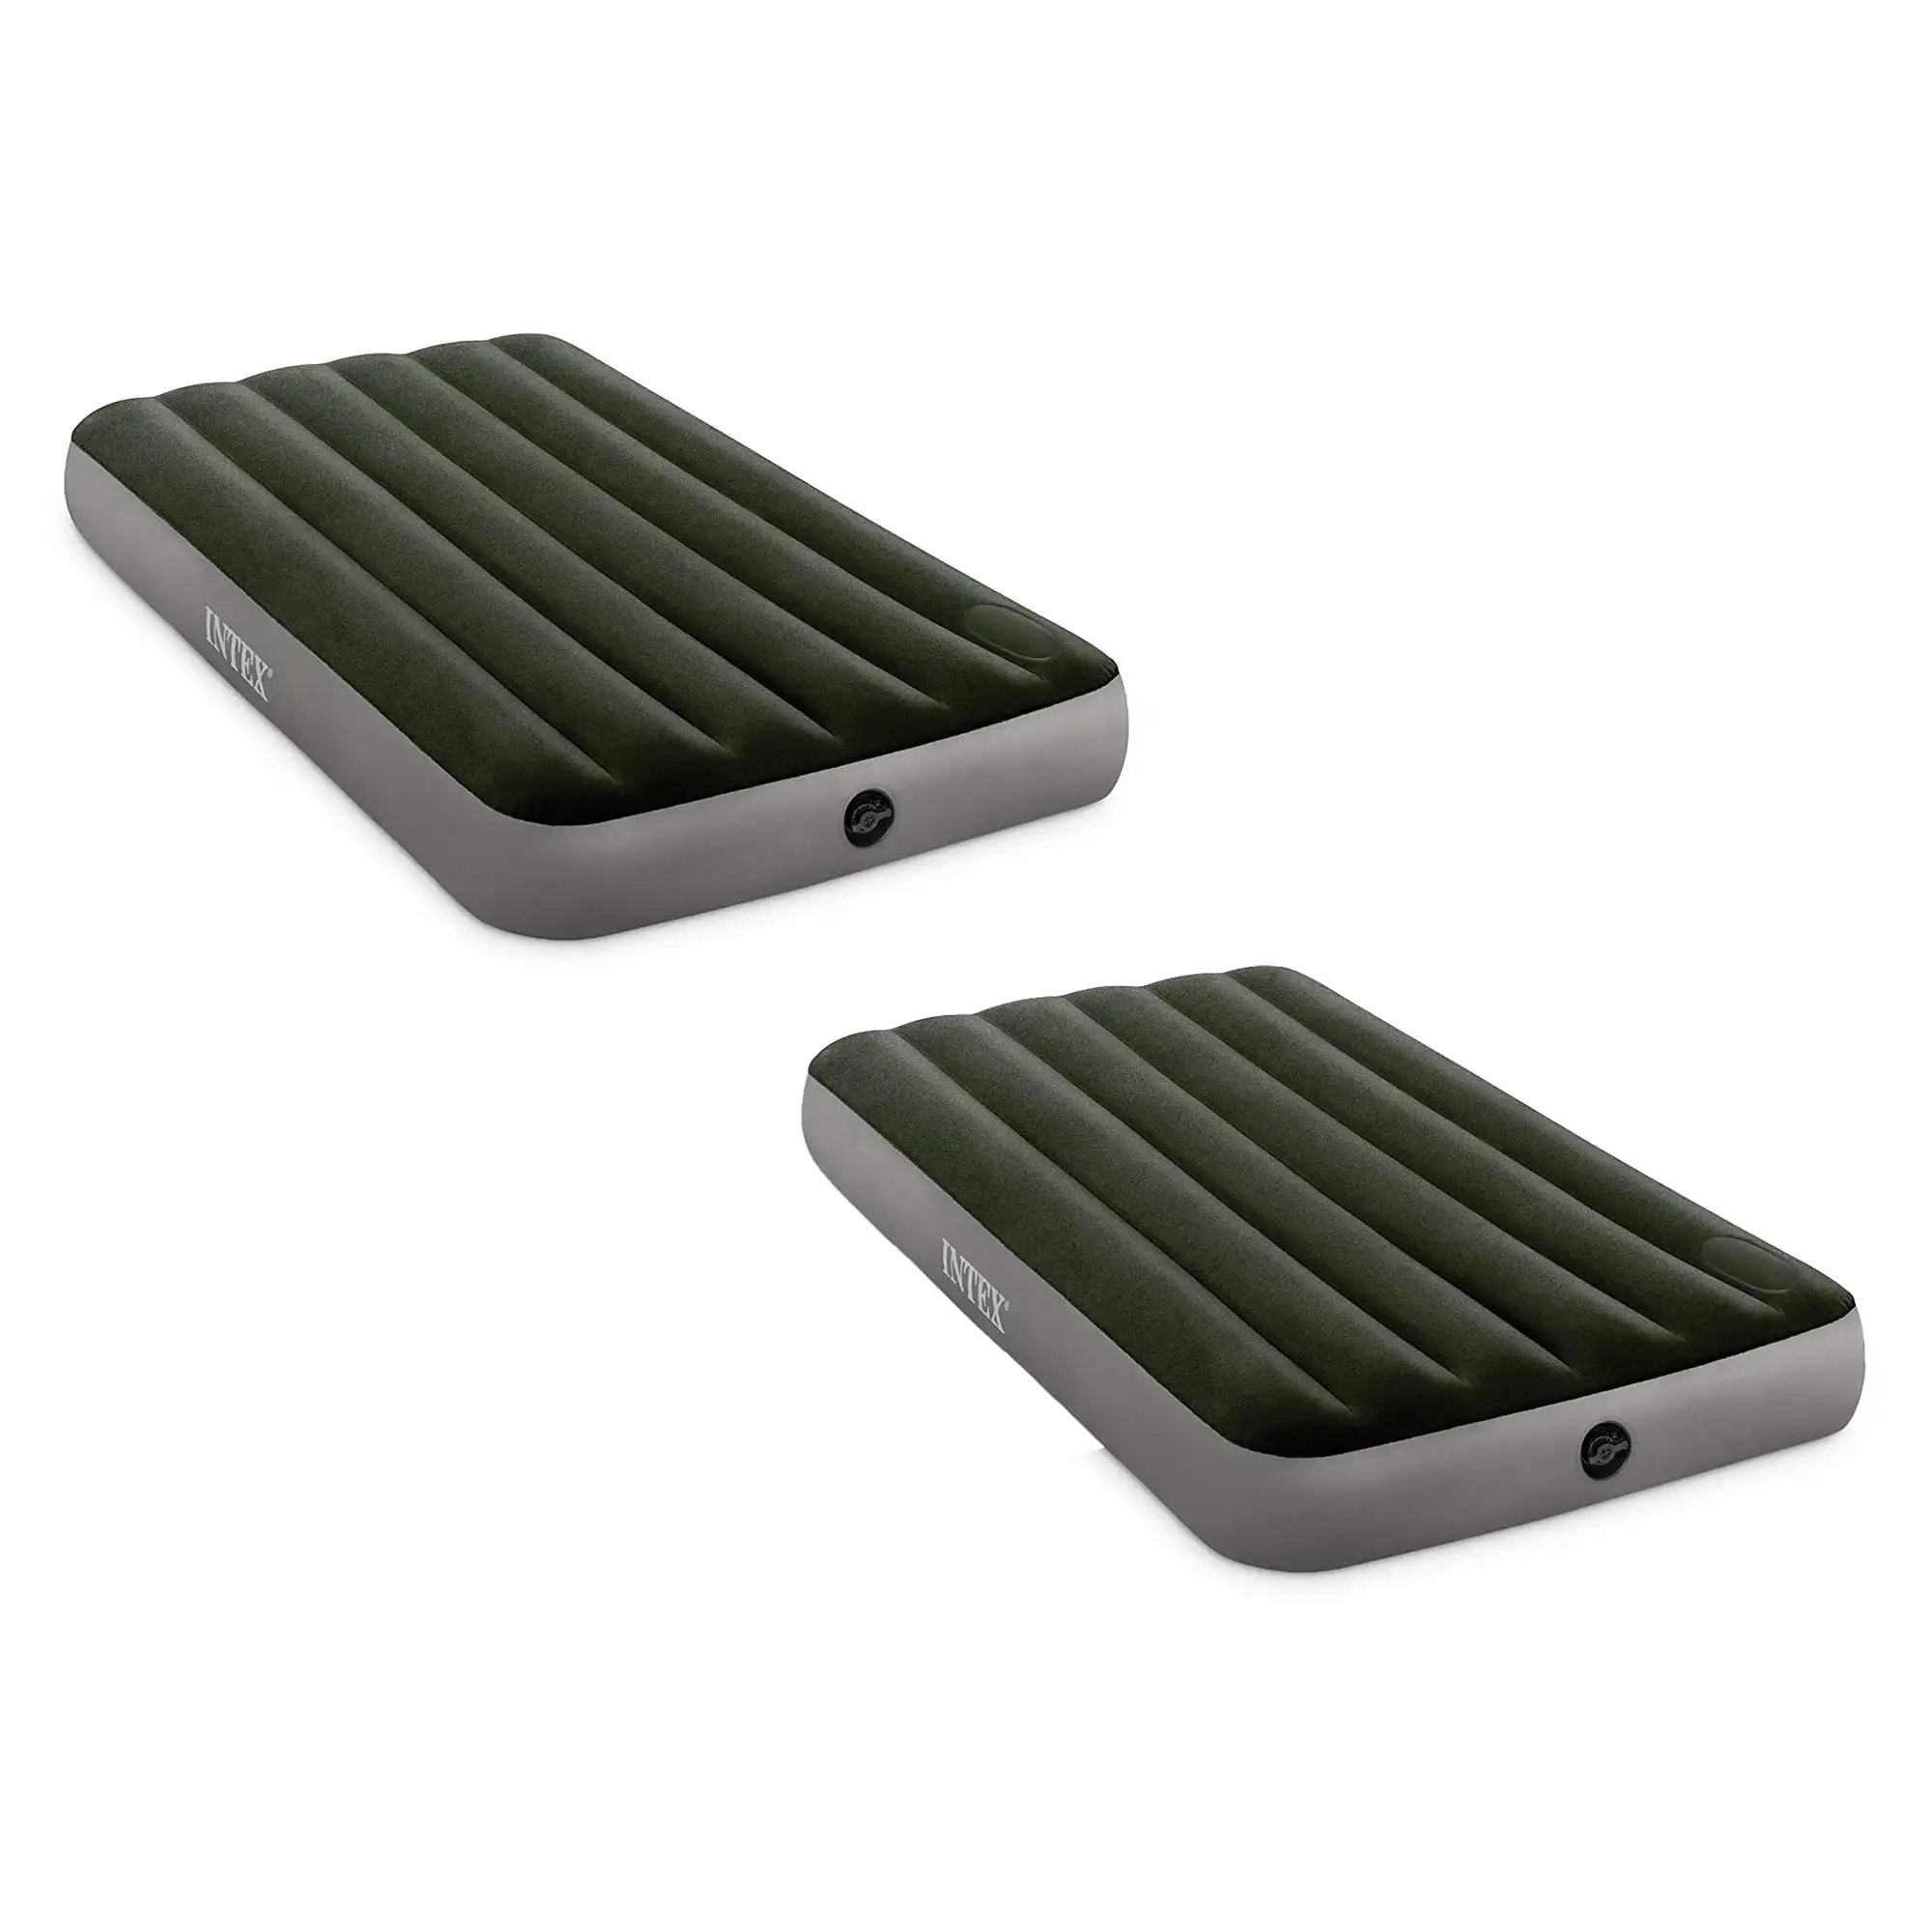 64763E Dura Beam Downy Air Mattress with Built In , Queen (2 Pack)